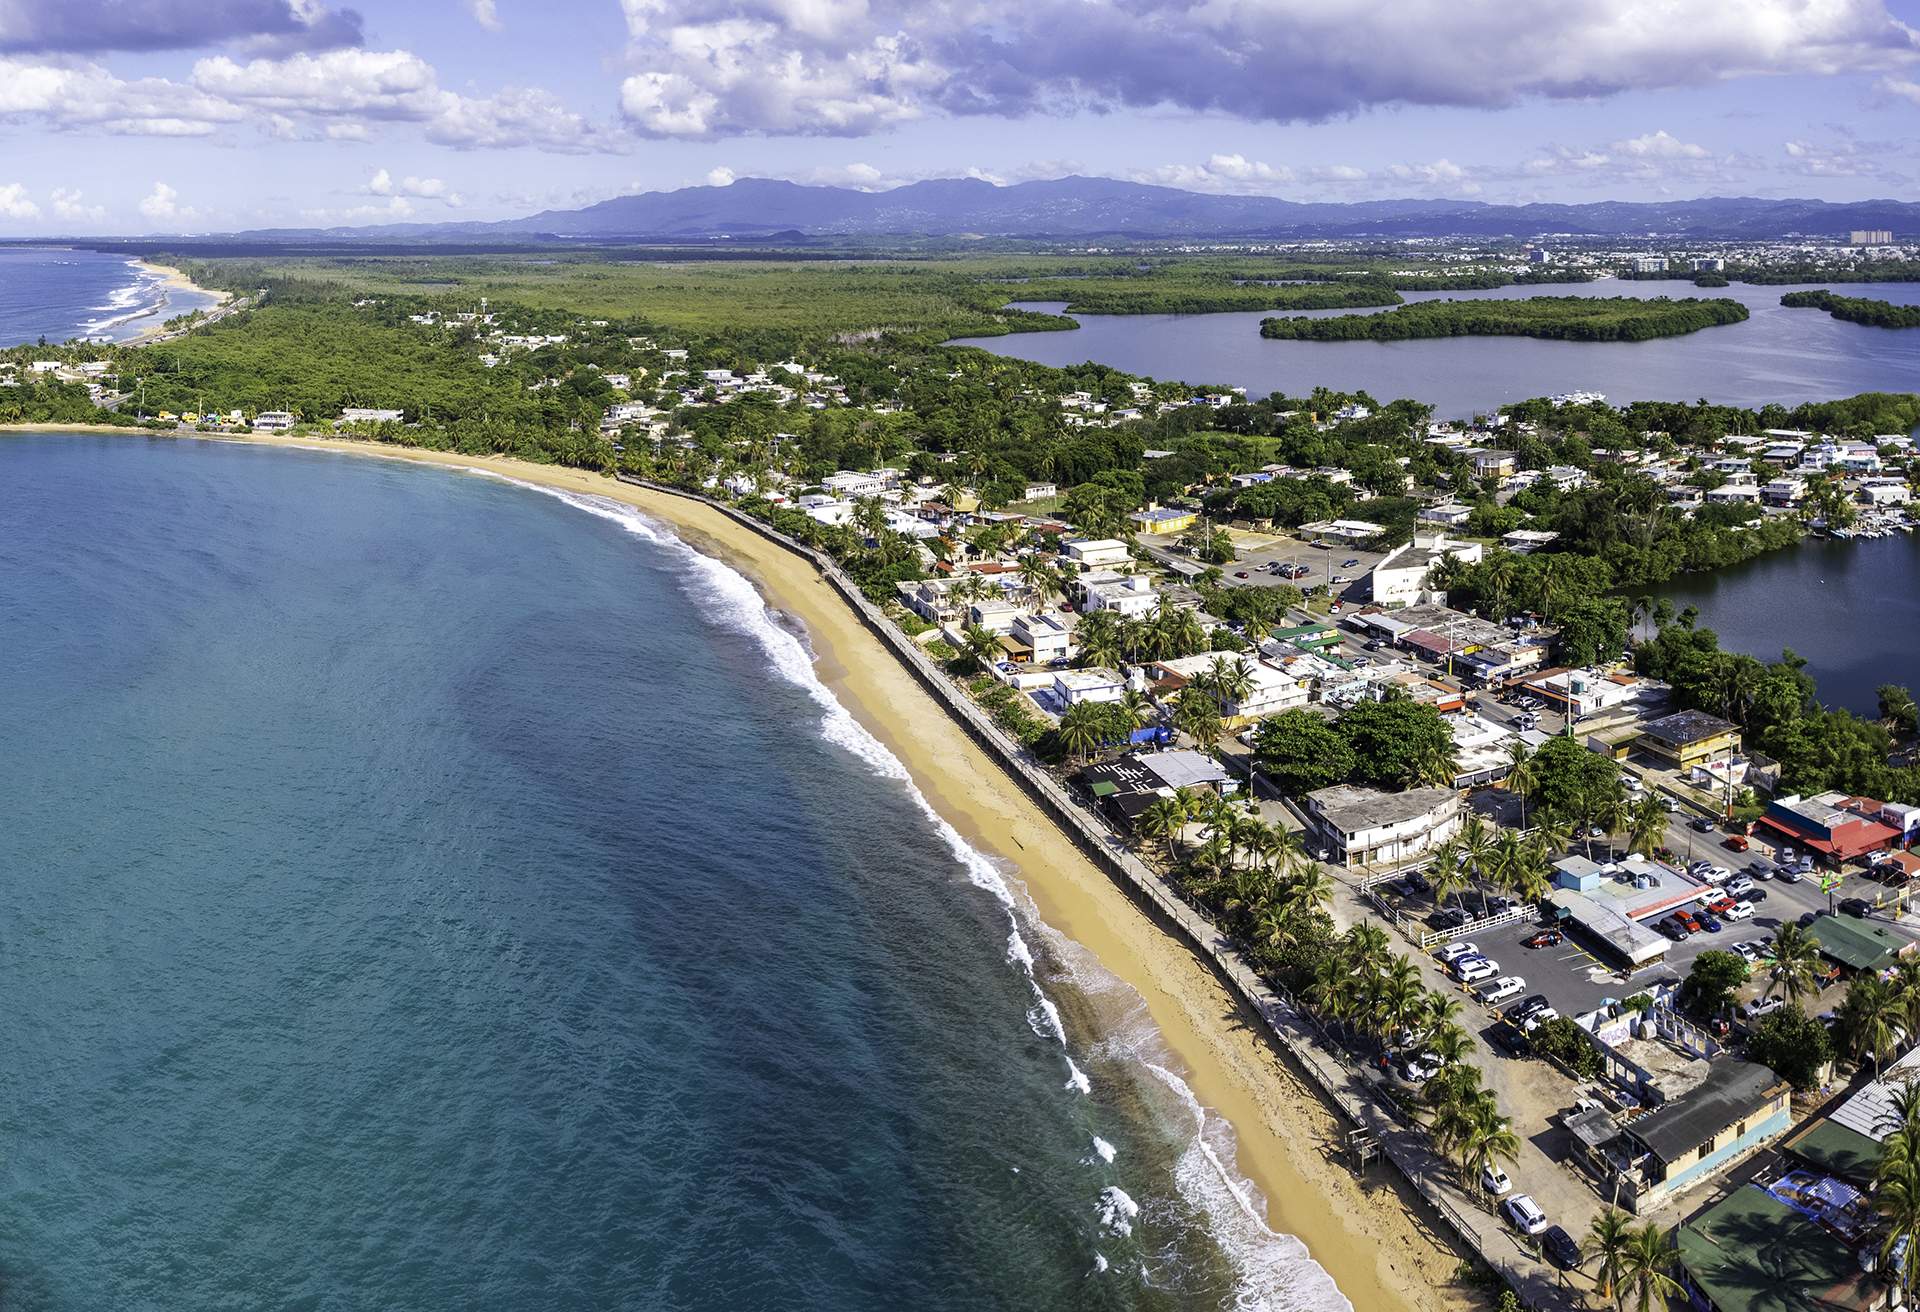 Aerial view of Caribbean beach and village, Puerto Rico